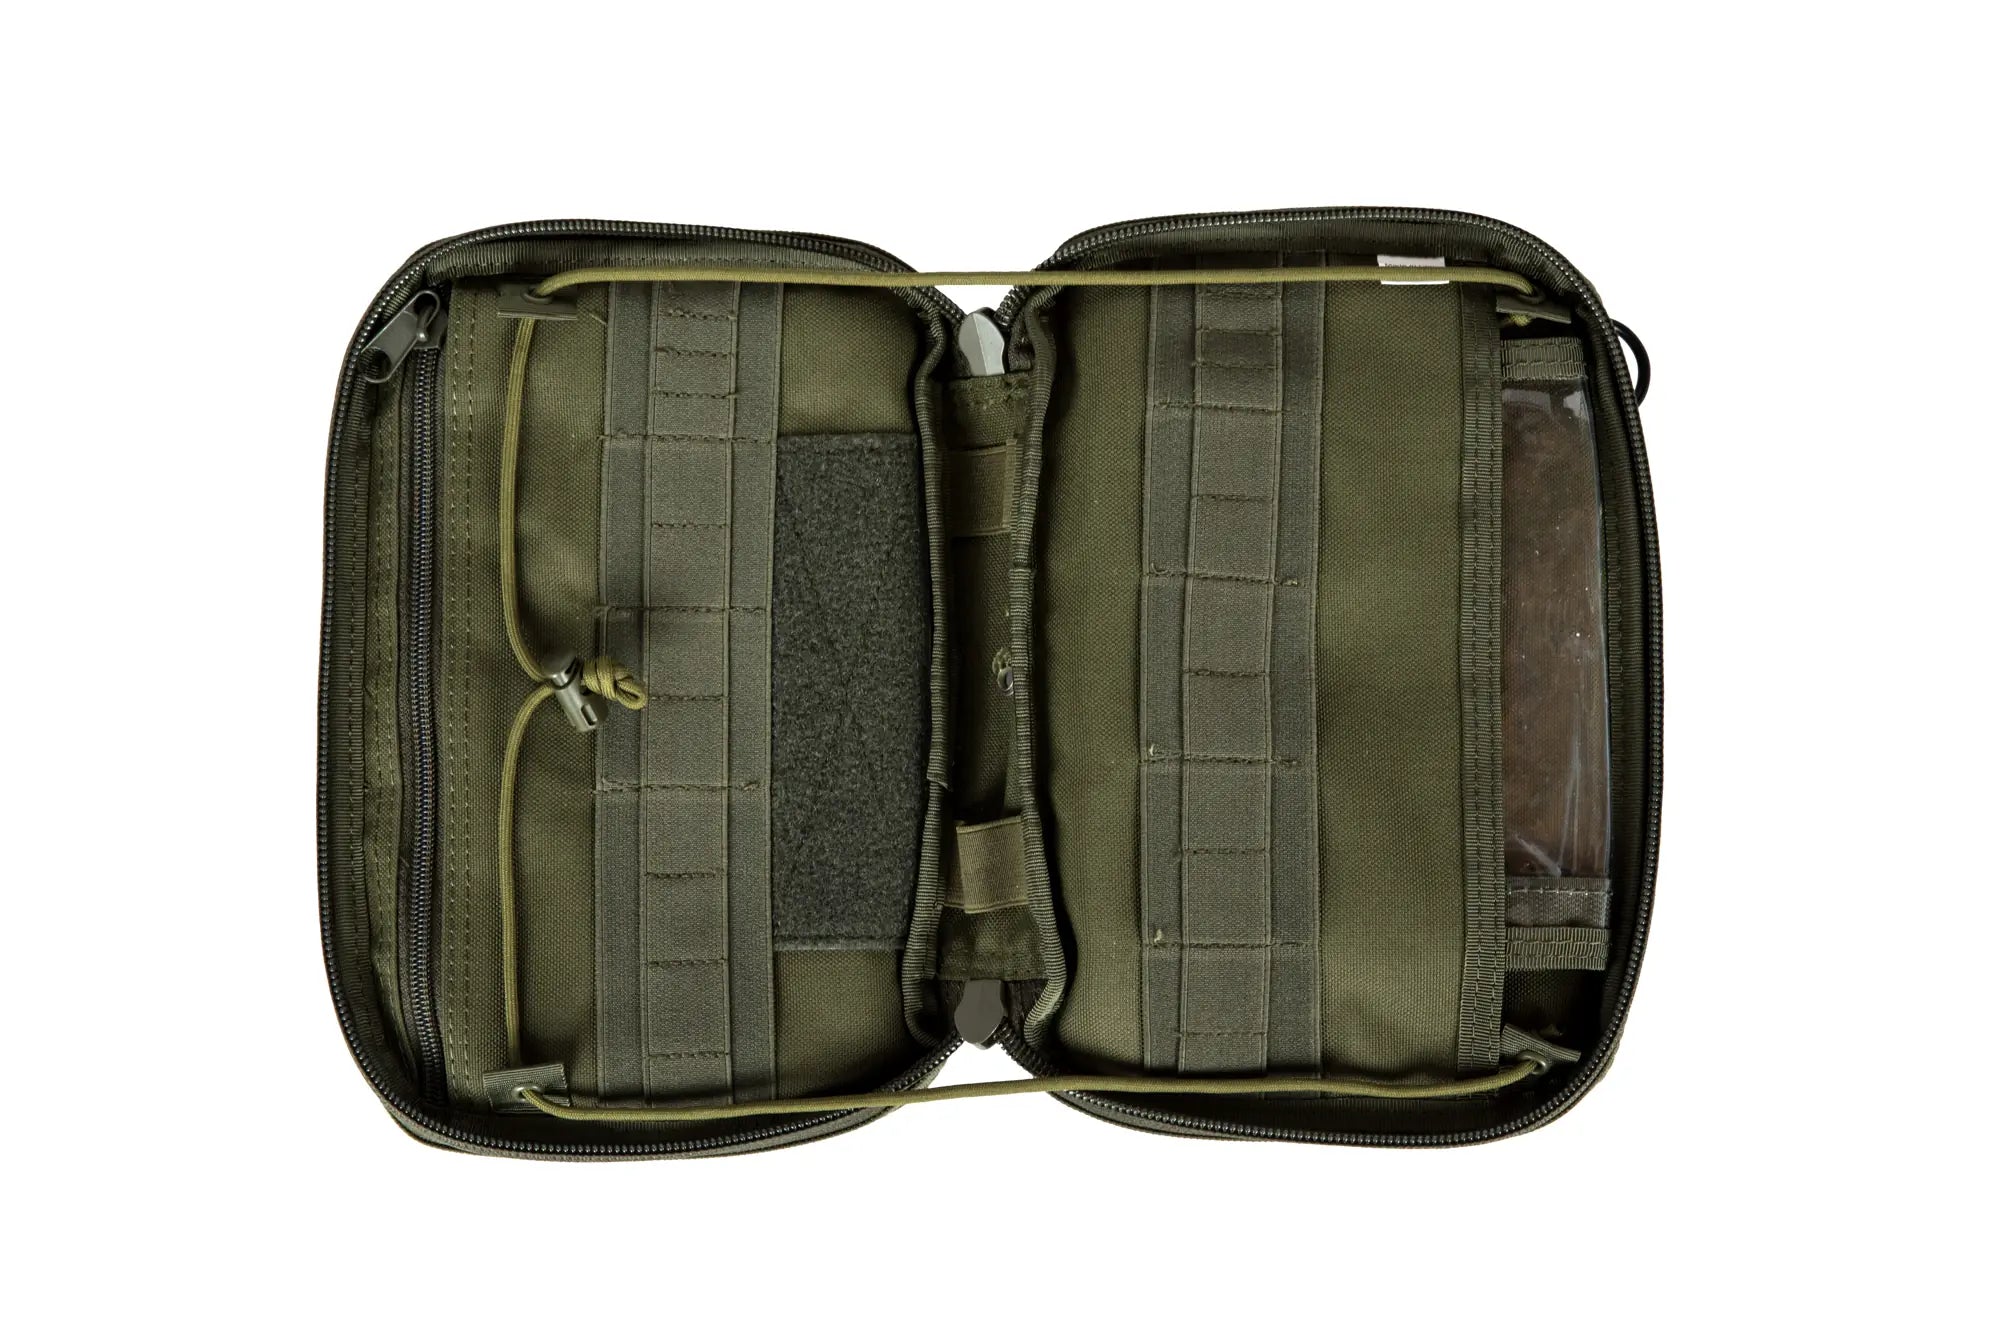 Large Administration Pouch with a Map Holder - Olive-6